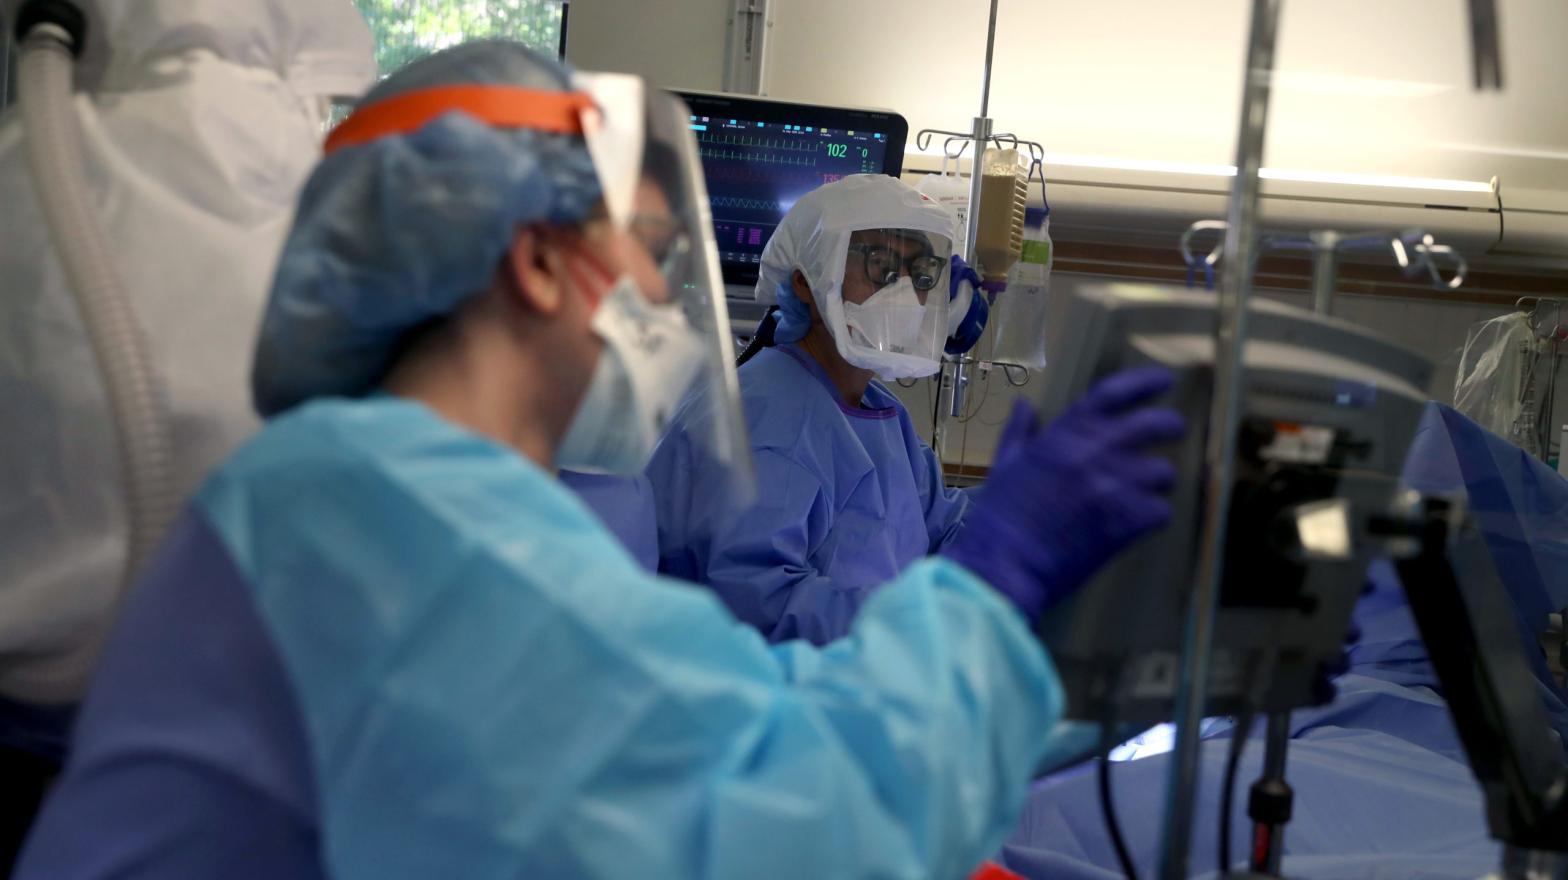 Doctors working on a covid-19 patient at Regional Medical Centre in San Jose, May 21, 2020. (Photo: Justin Sullivan, Getty Images)